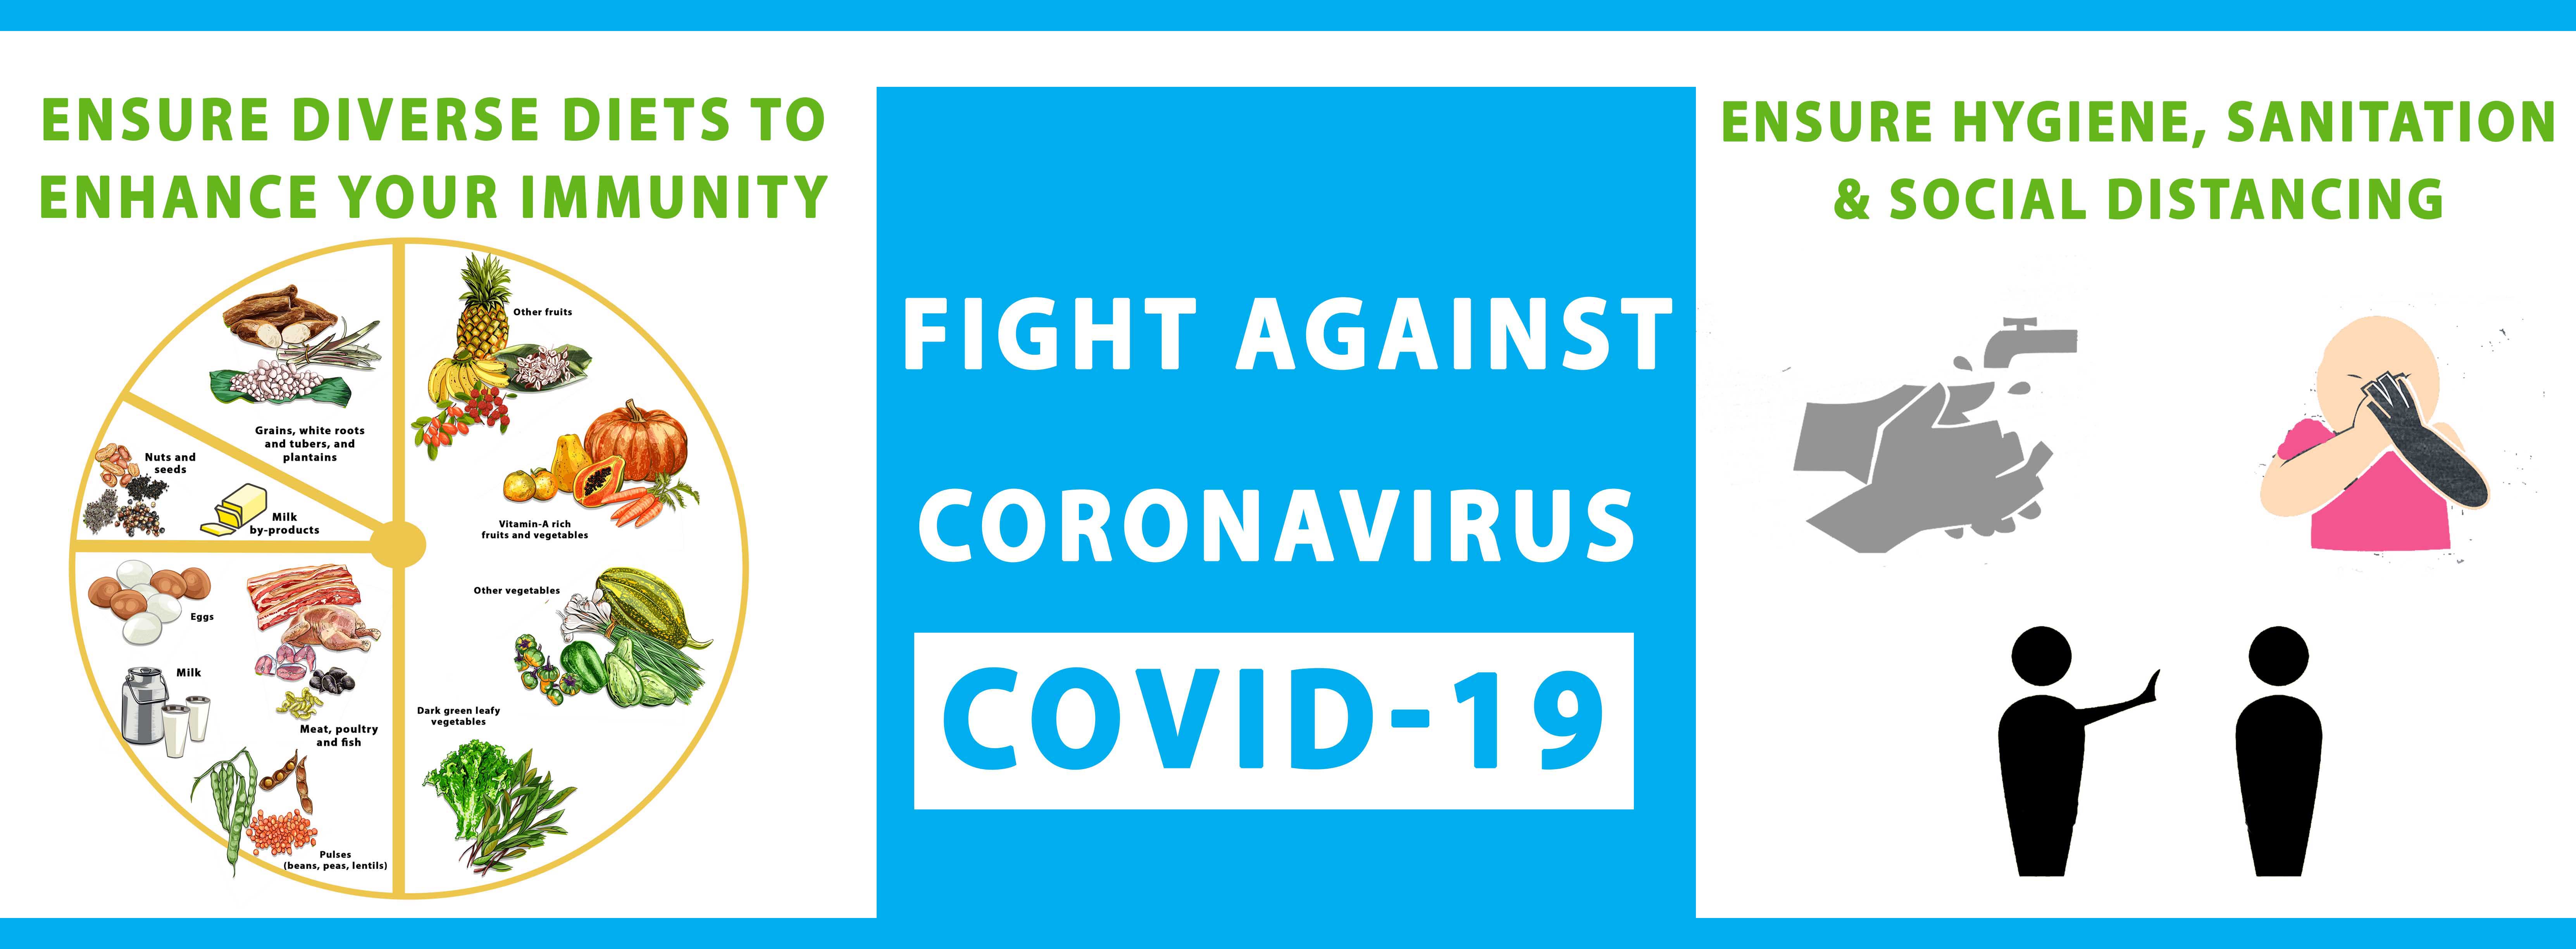 Read more about the article Fight against CORONAVIRUS by enhancing immunity through diverse diets